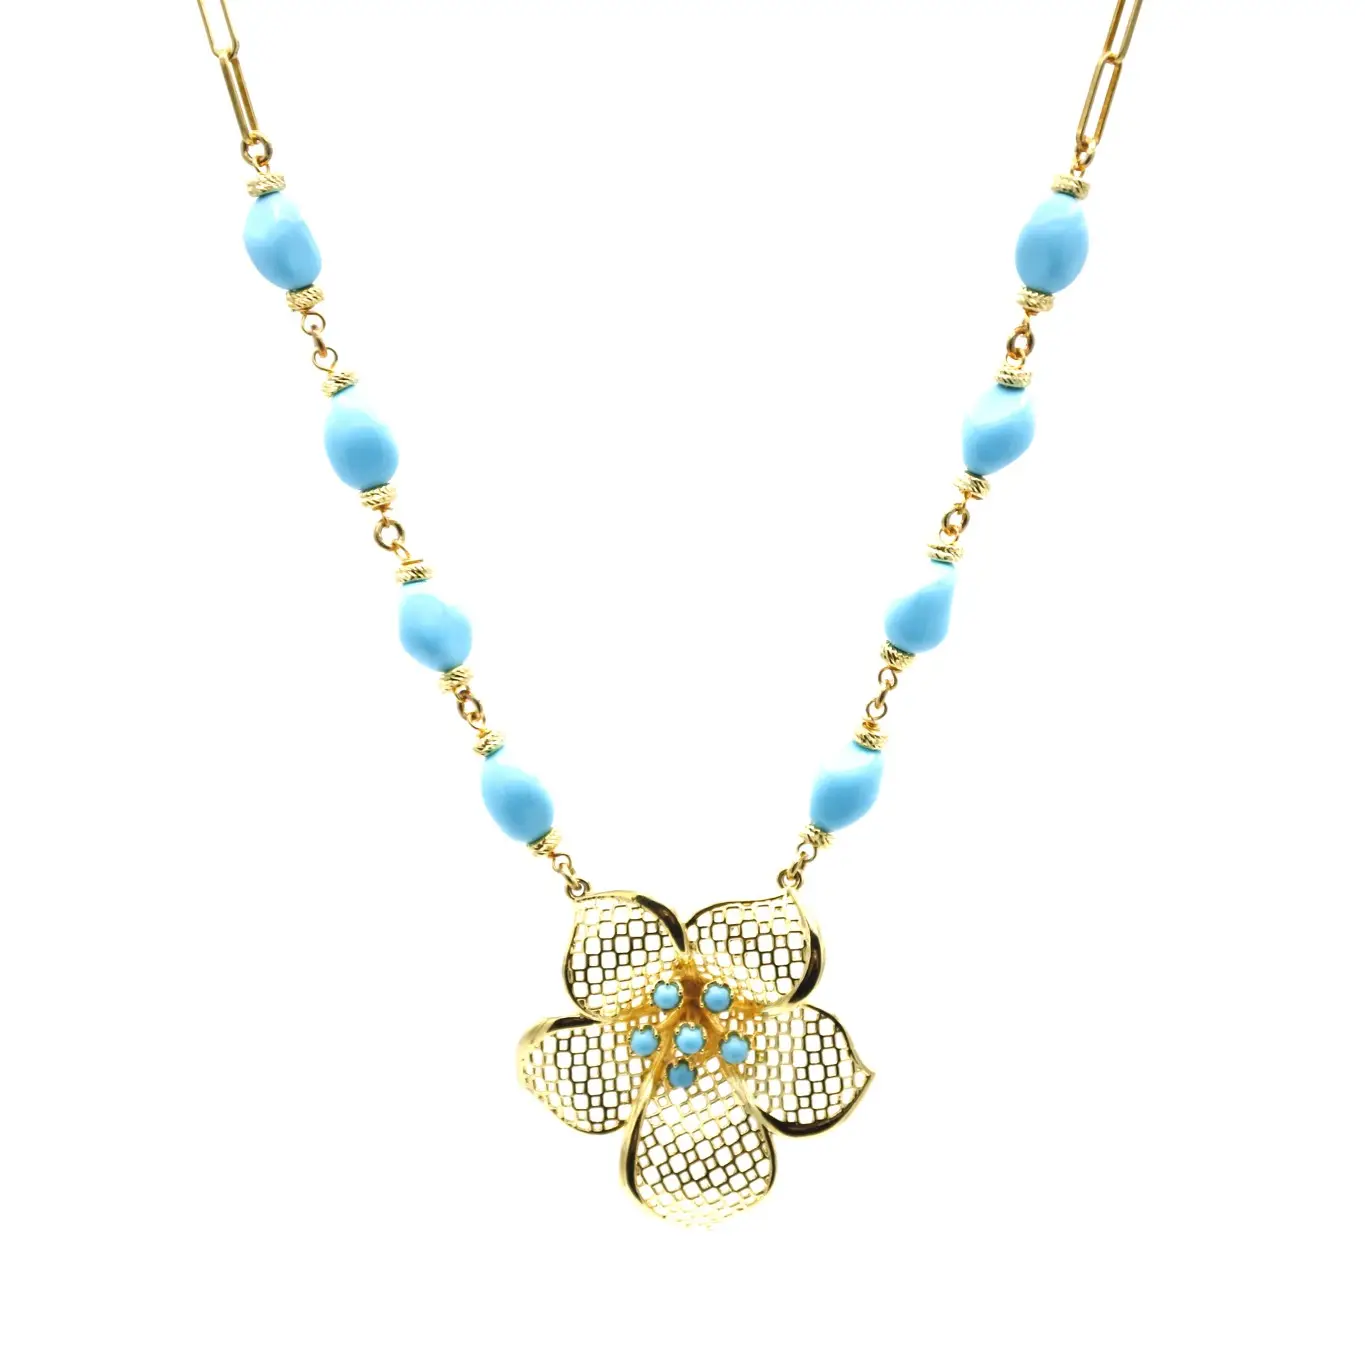 Necklace in 925 Silver plated in 750 Gold with chain alternating turquoise stones and final flower with net effect carving